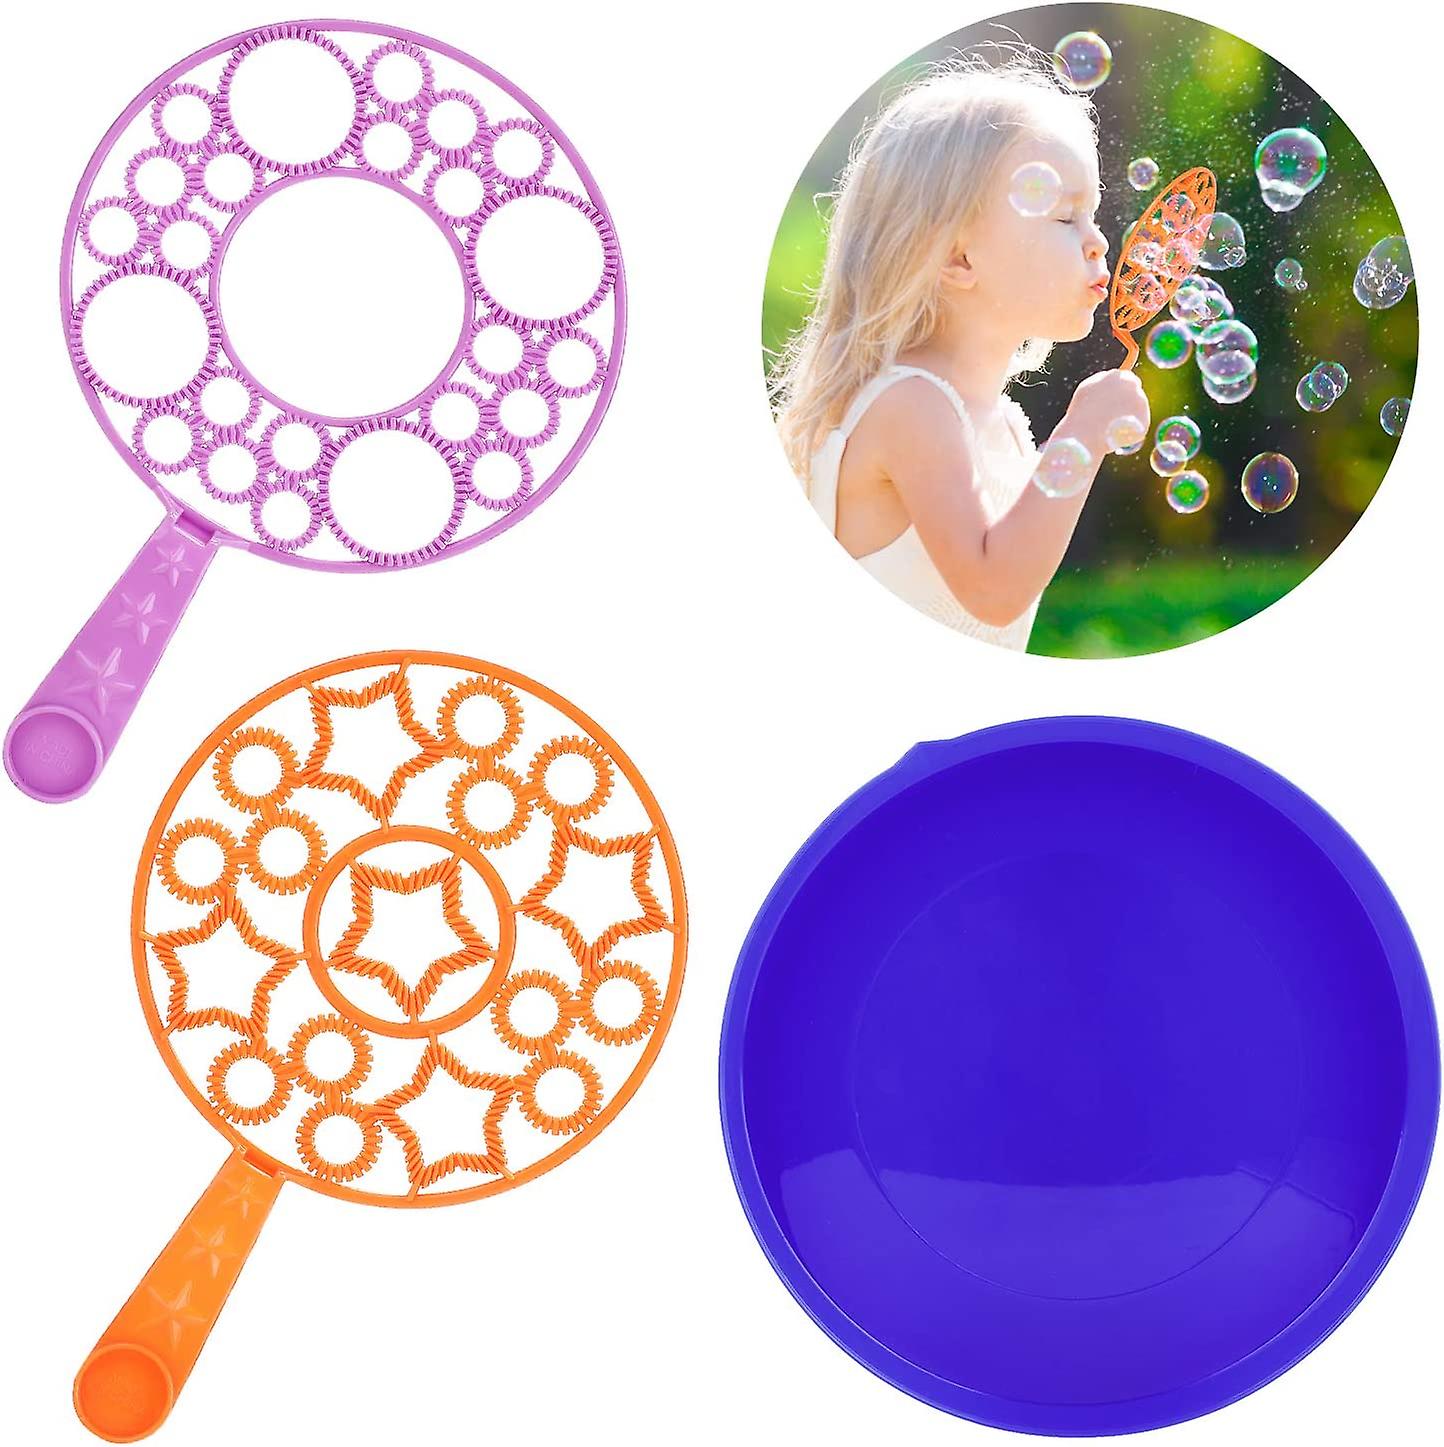 Big Bubble Wands Set: Bubbles Wand Tray Funny Bubbles Maker， Nice For Outdoor Playtime and Birthday Party and Games， Suitable For All Age People